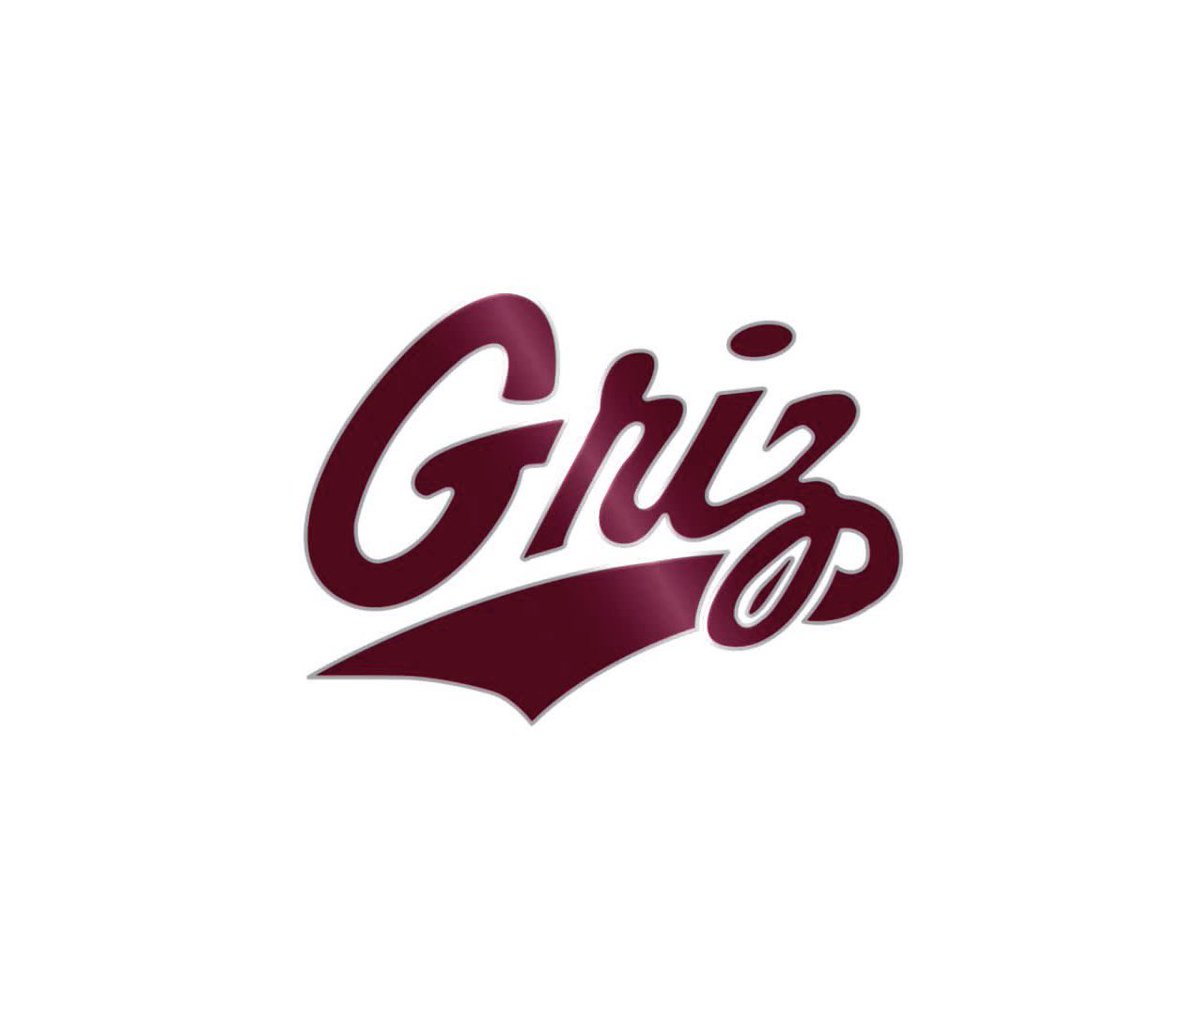 After a great camp and an amazing phone call with @CoachPease I am extremely thankful to receive a full scholarship to play football for @MontanaGrizFB Thank you to the coaches for this opportunity! @kbaer51 @Coach_Hauck @GrizCoachGreen @CoachBErickson @BrandonHuffman